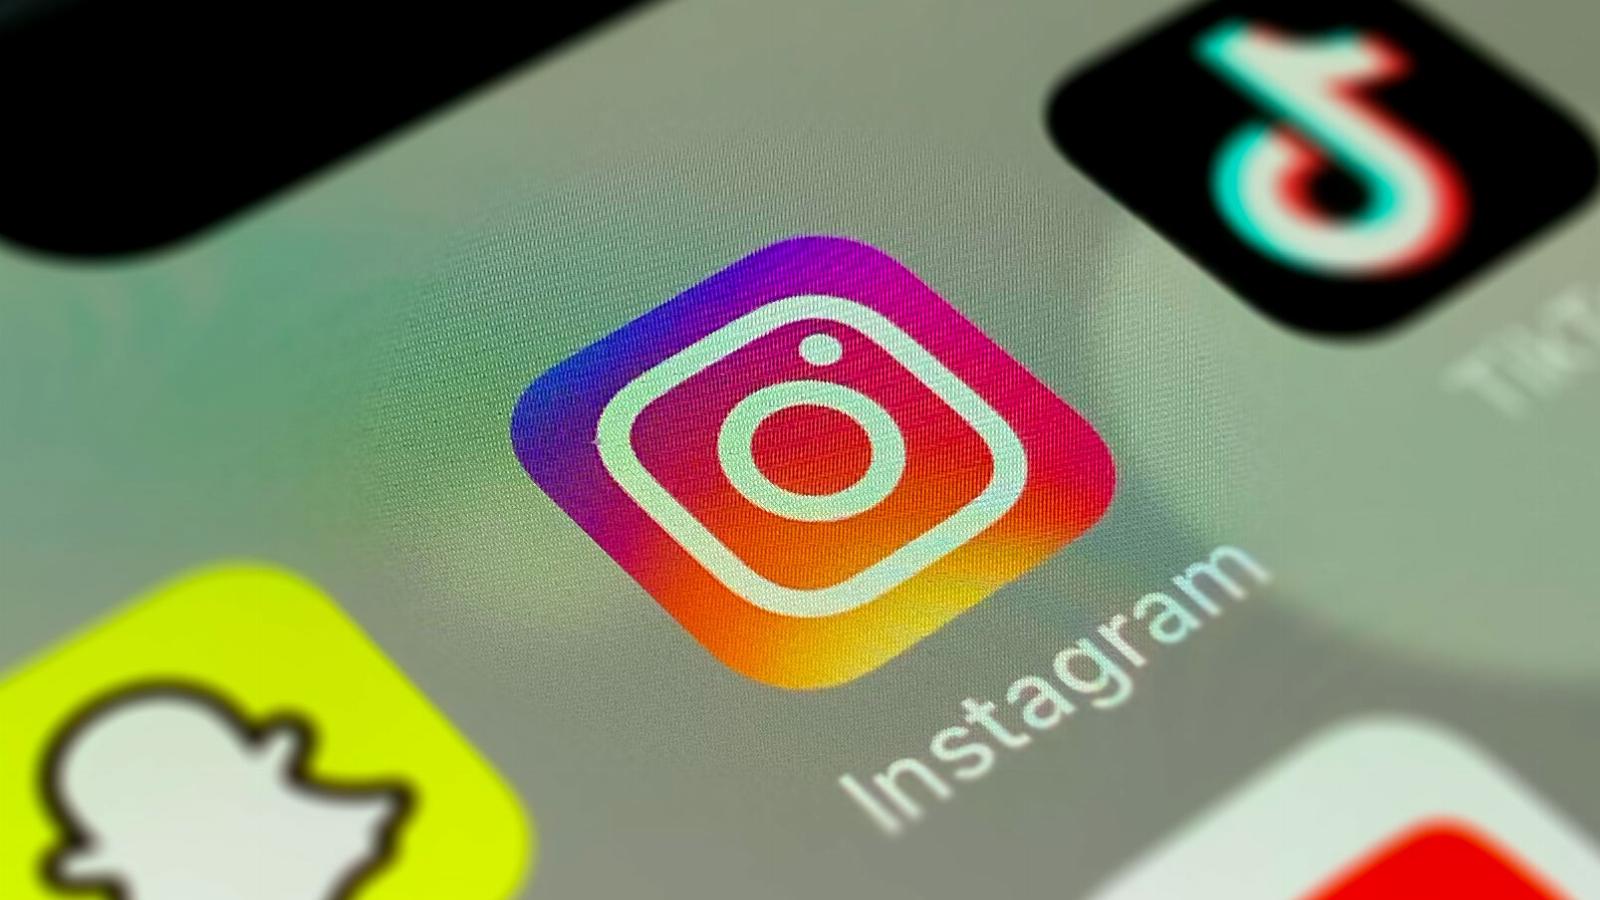 Instagram might be working on an AI chatbot